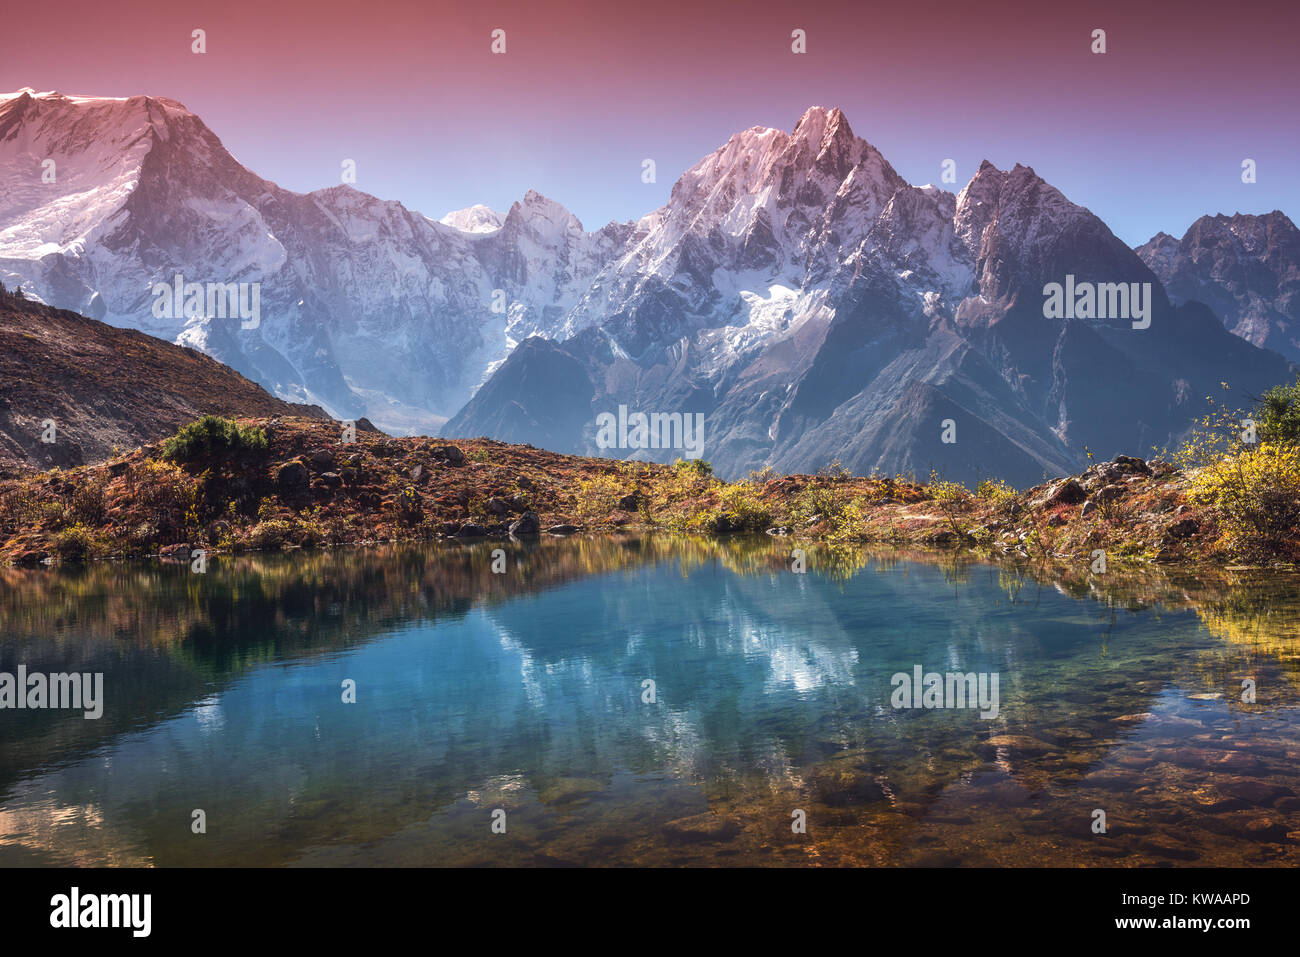 Beautiful landscape with high mountains with snow covered peaks, sky reflected in lake. Mountain valley with reflection in water in sunrise. Nepal. Am Stock Photo